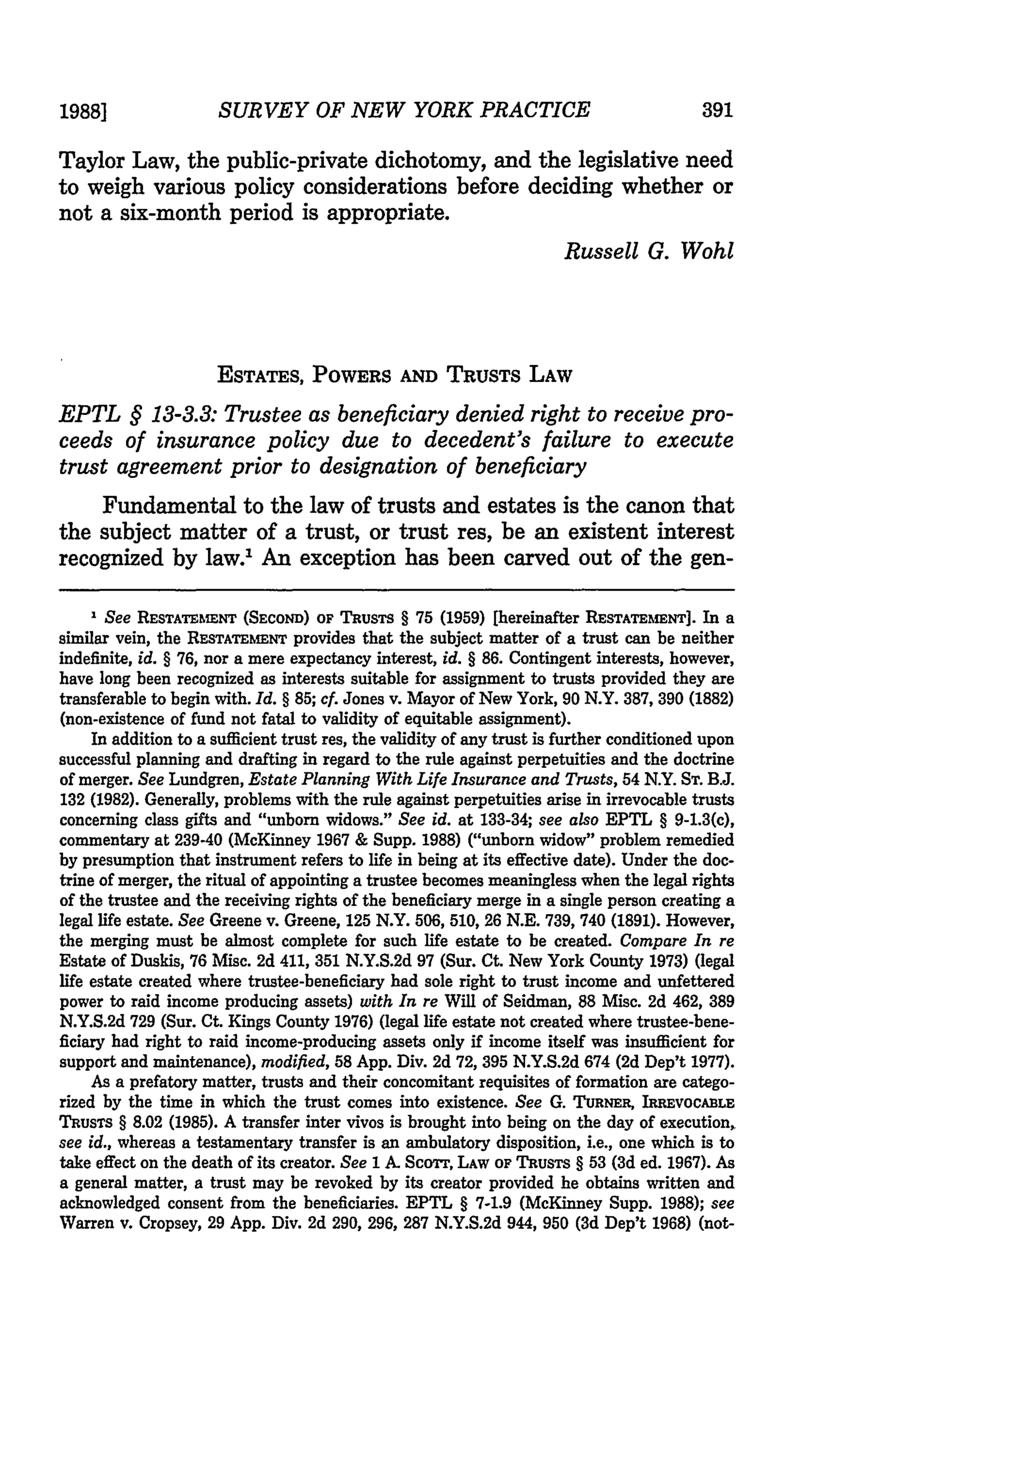 1988] SURVEY OF NEW YORK PRACTICE Taylor Law, the public-private dichotomy, and the legislative need to weigh various policy considerations before deciding whether or not a six-month period is